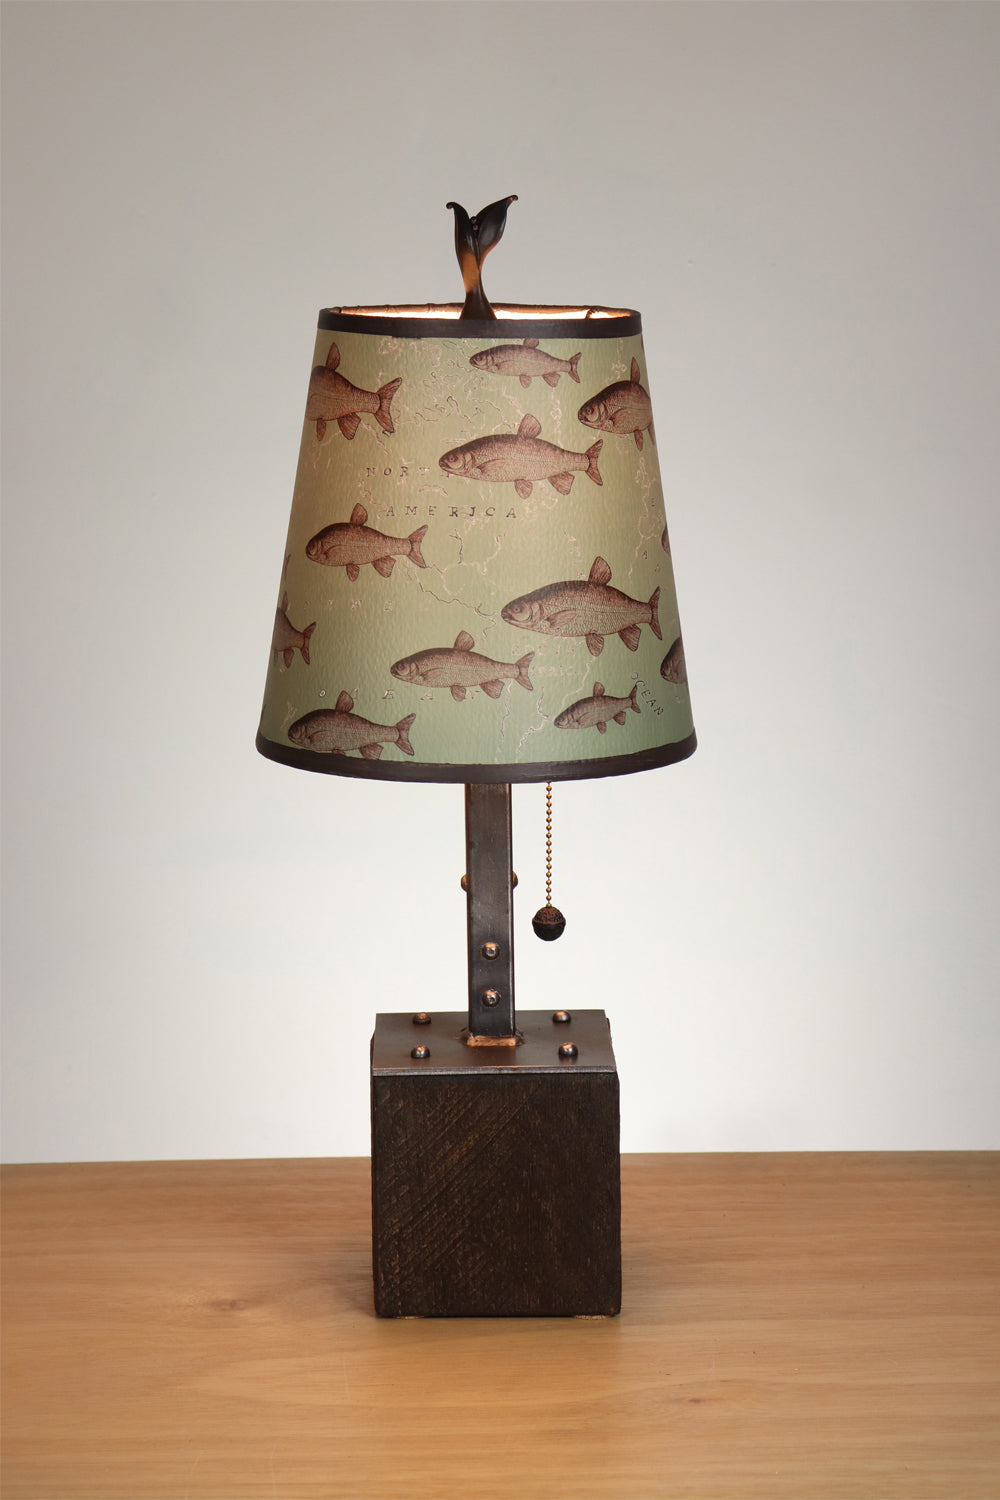 Janna Ugone & Co Table Lamp Steel Table Lamp on Reclaimed Wood with Small Drum Shade in Trout